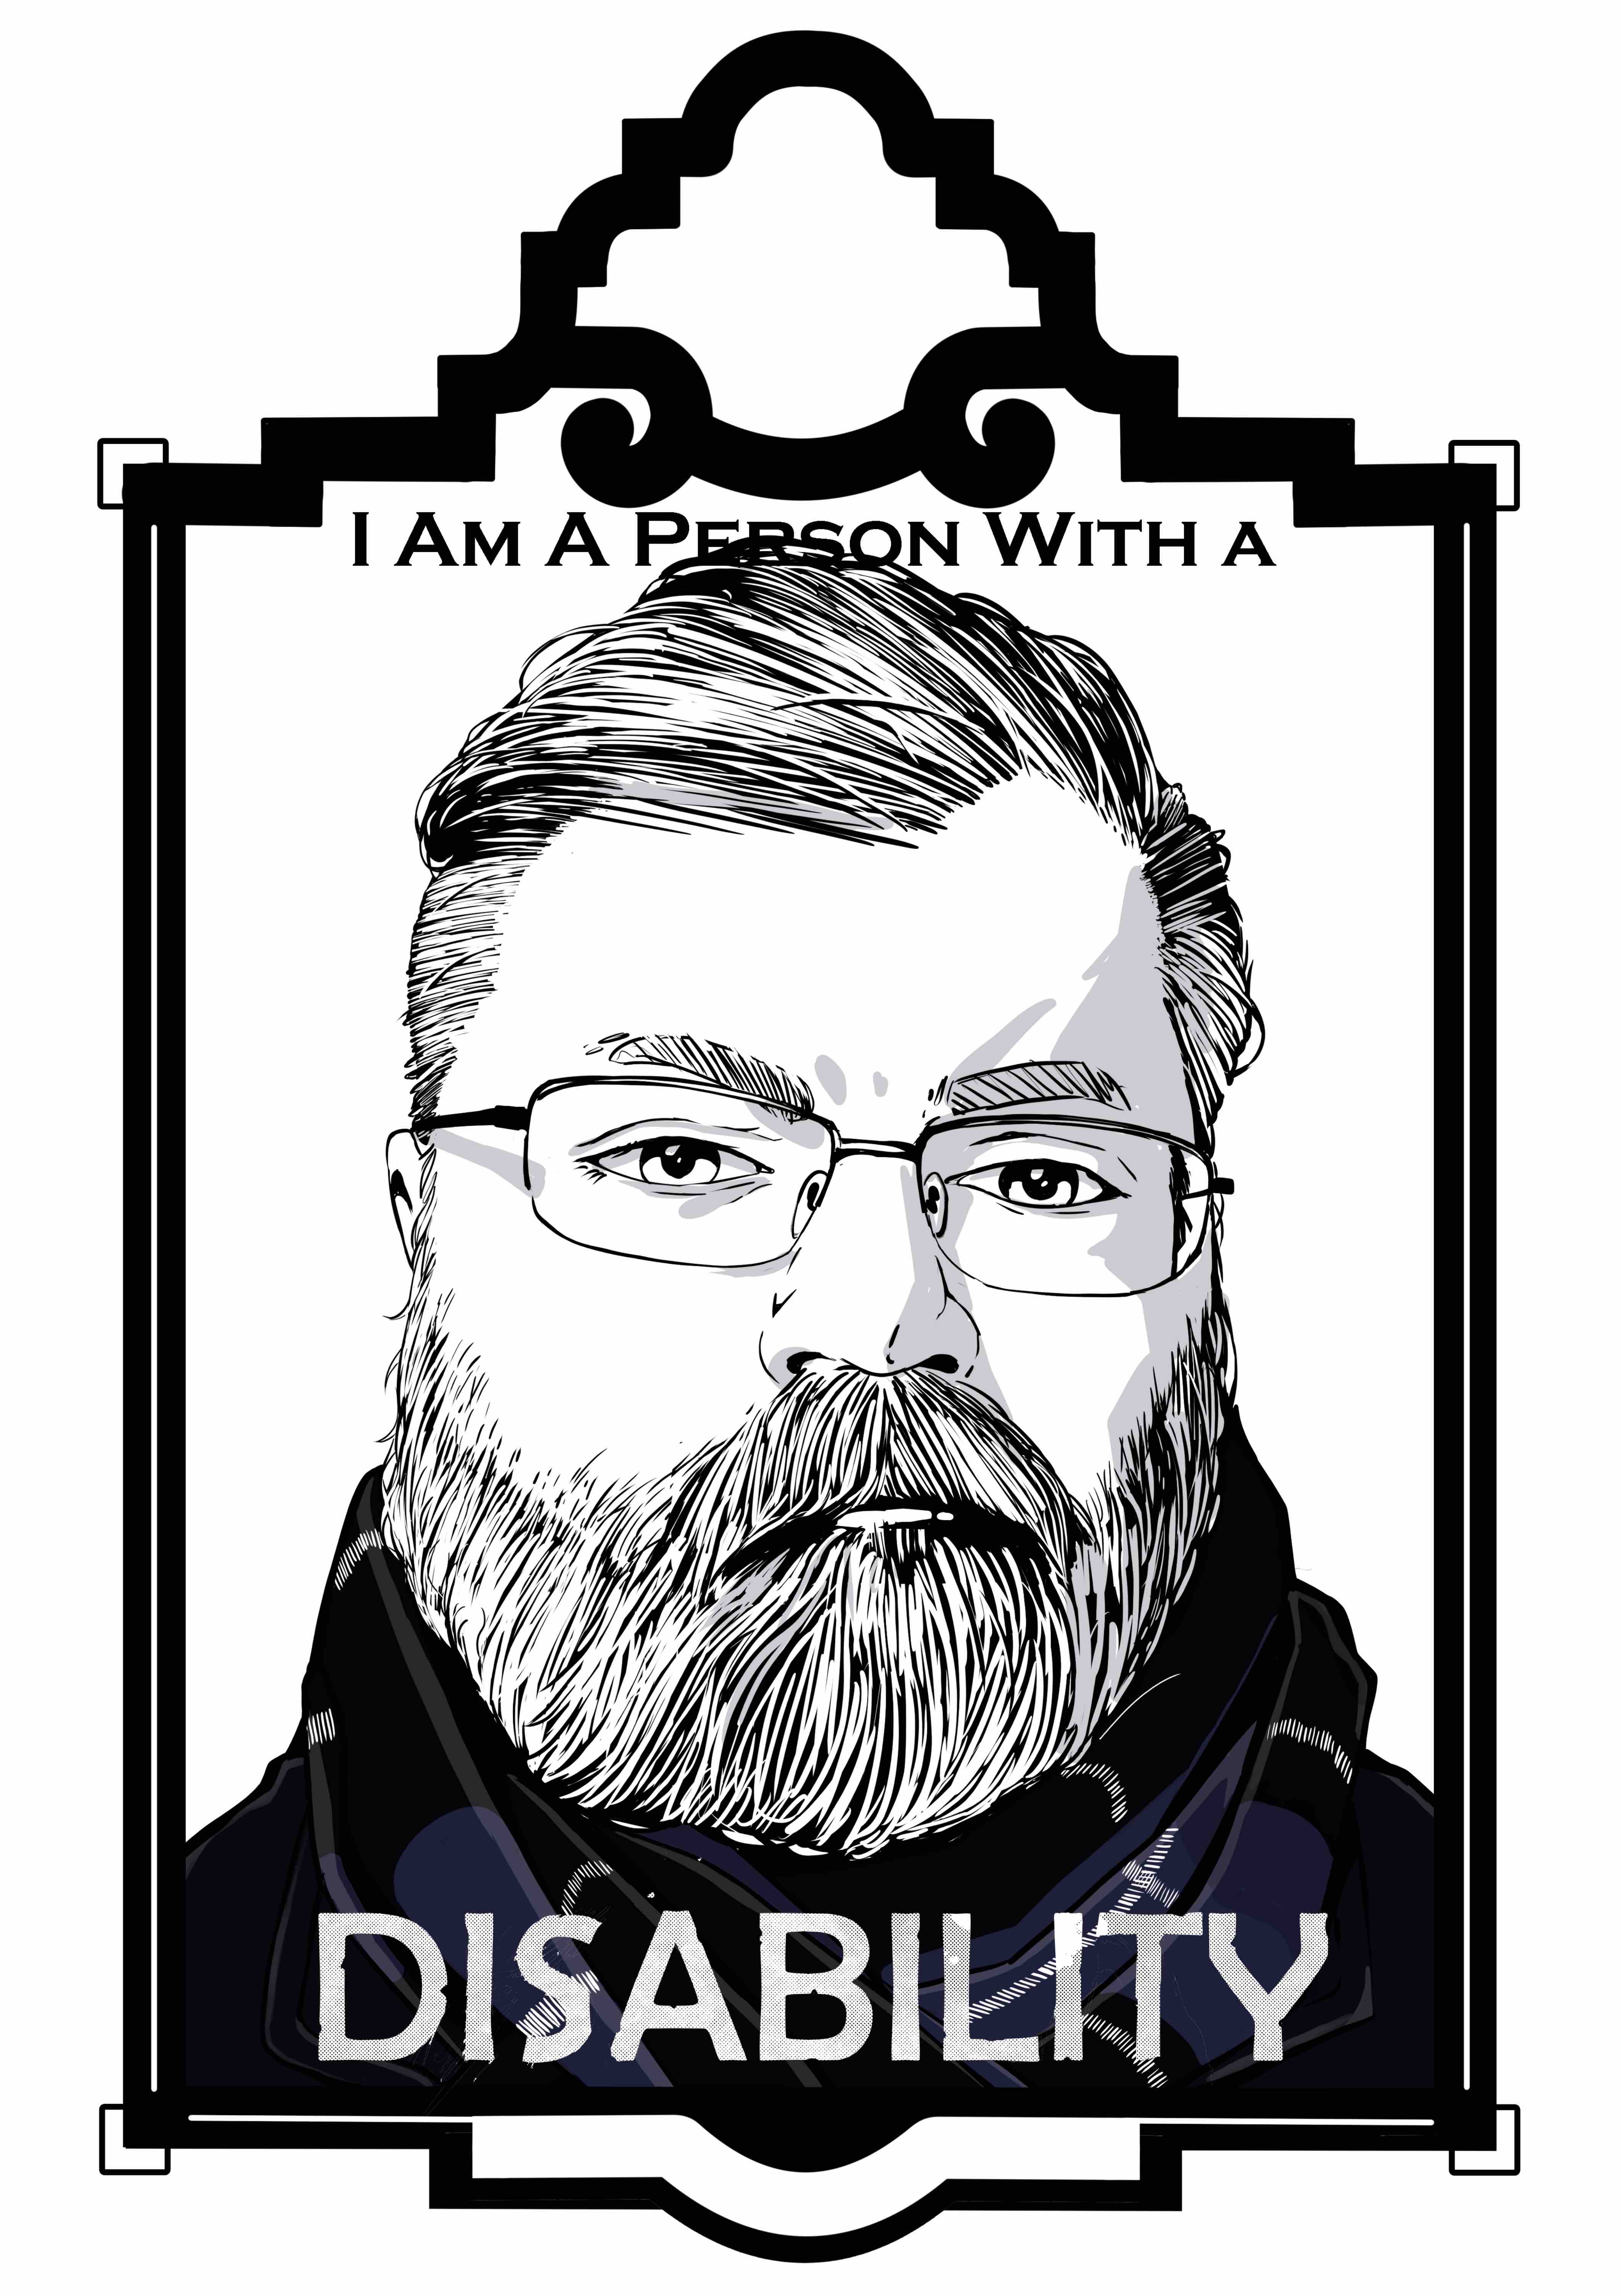 An illustration of a man with short hair, a beard, and glasses sits inside an art deco frame. Text with the words “I am a person with a” at the top of the illustration and the word “Disability” in all caps at the bottom. The Illustration is a self-portrait of the artist drawn in black, white, and grey. His hair is cut short on the sides and parted on the right. The hair on the top of his head is longer and combed from right to left. He has a thick beard with a stern look on his face. The artists glasses are square framed with rounded corners, and he has a bulbus nose. The artist is wearing a black and blue scarf wrapped around his neck.